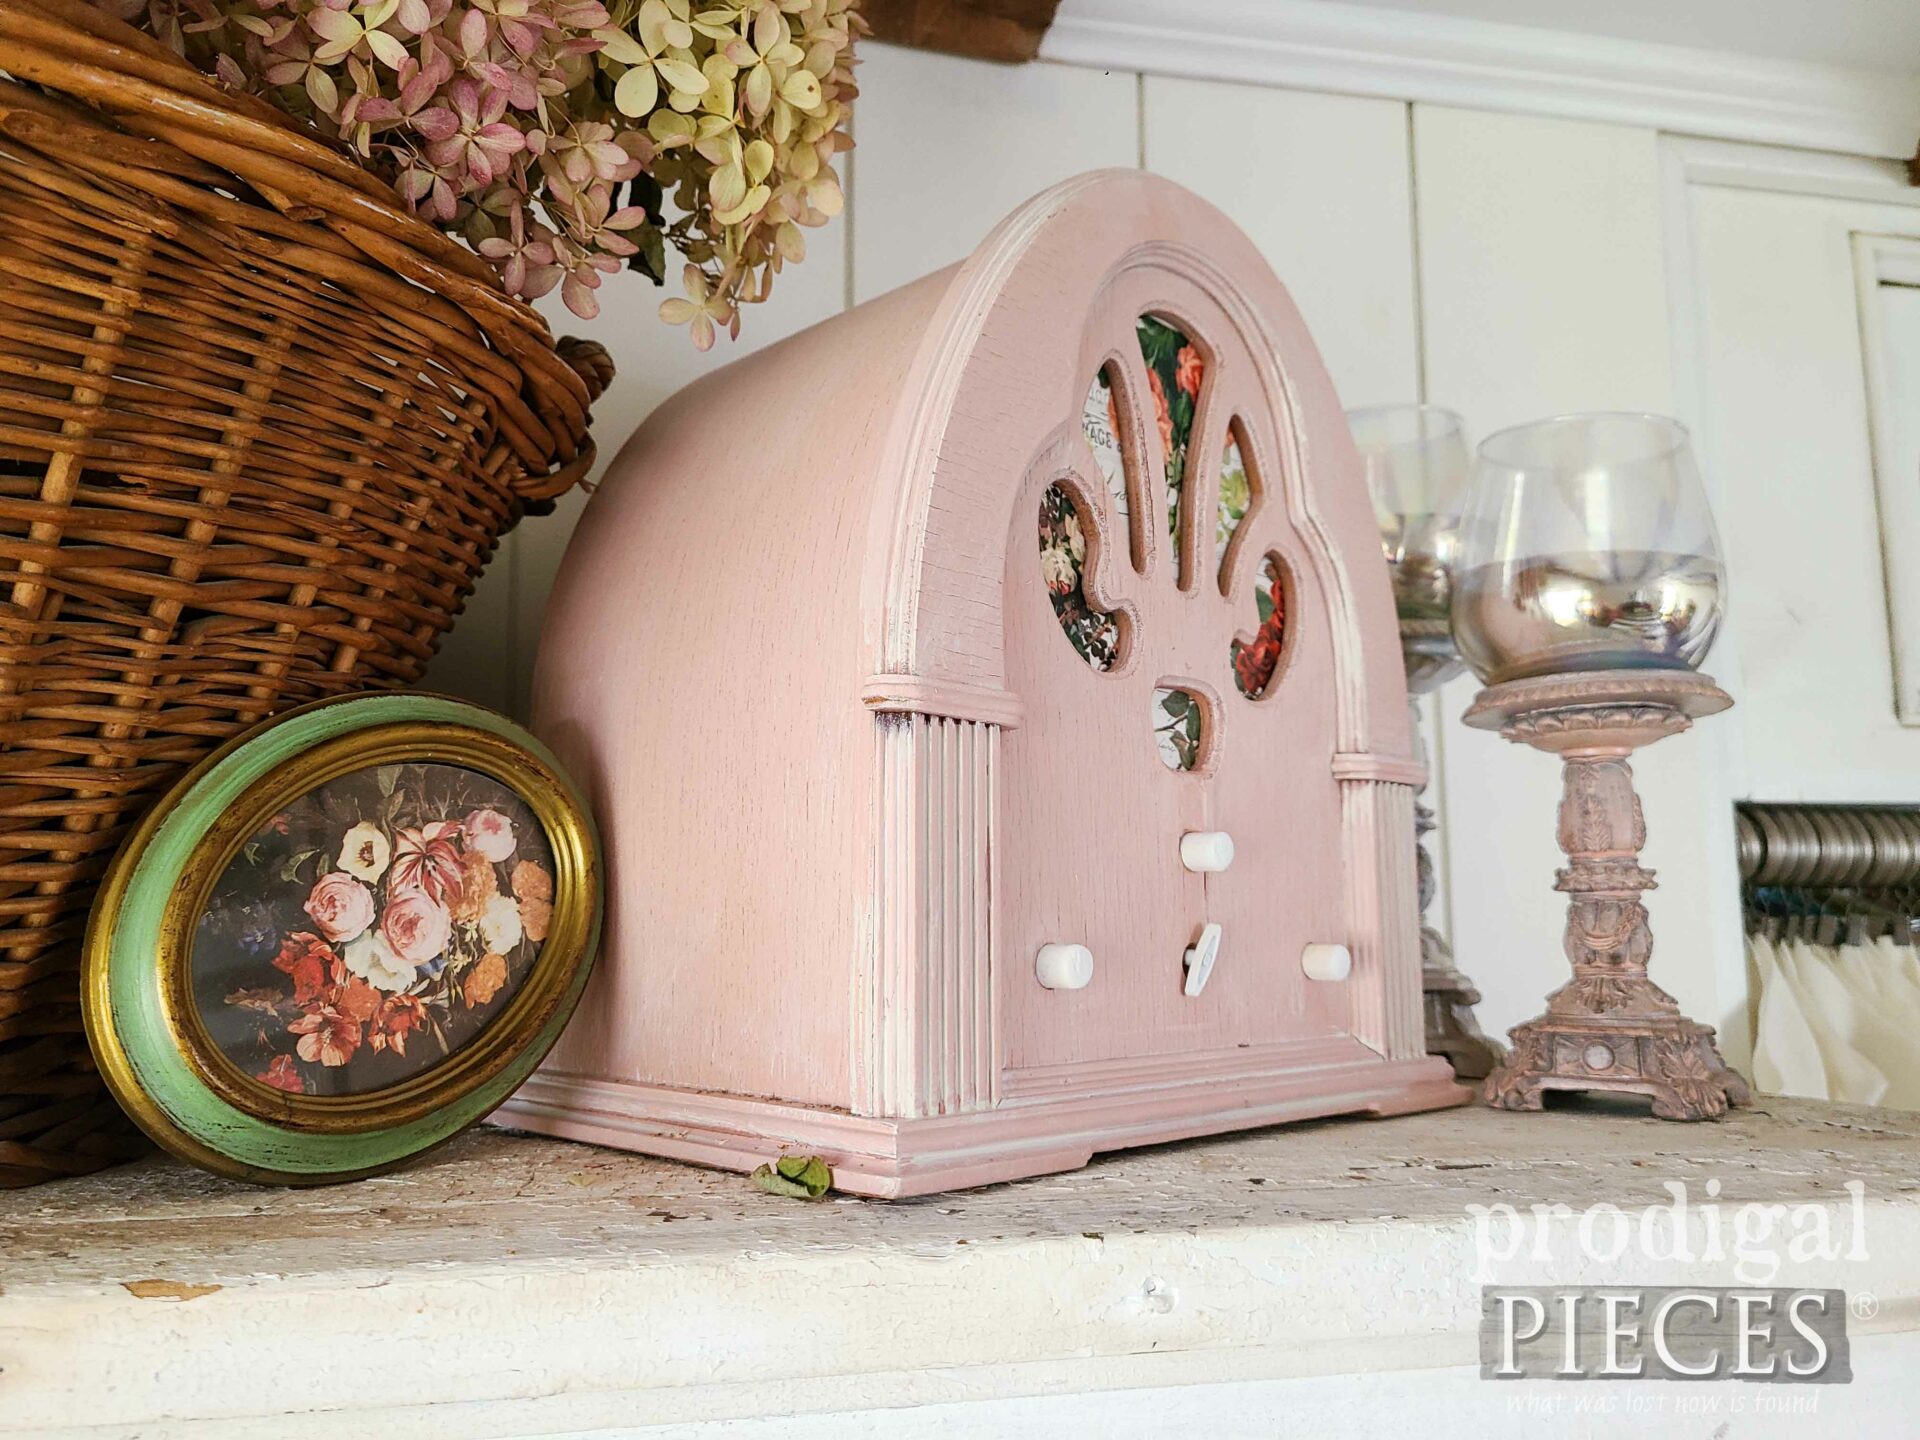 Shabby Chic Antique Radio Upcycled into Music Box Light by Larissa of Prodigal Pieces | prodigalpieces.com #prodigalpieces #pink #radio #upcycled